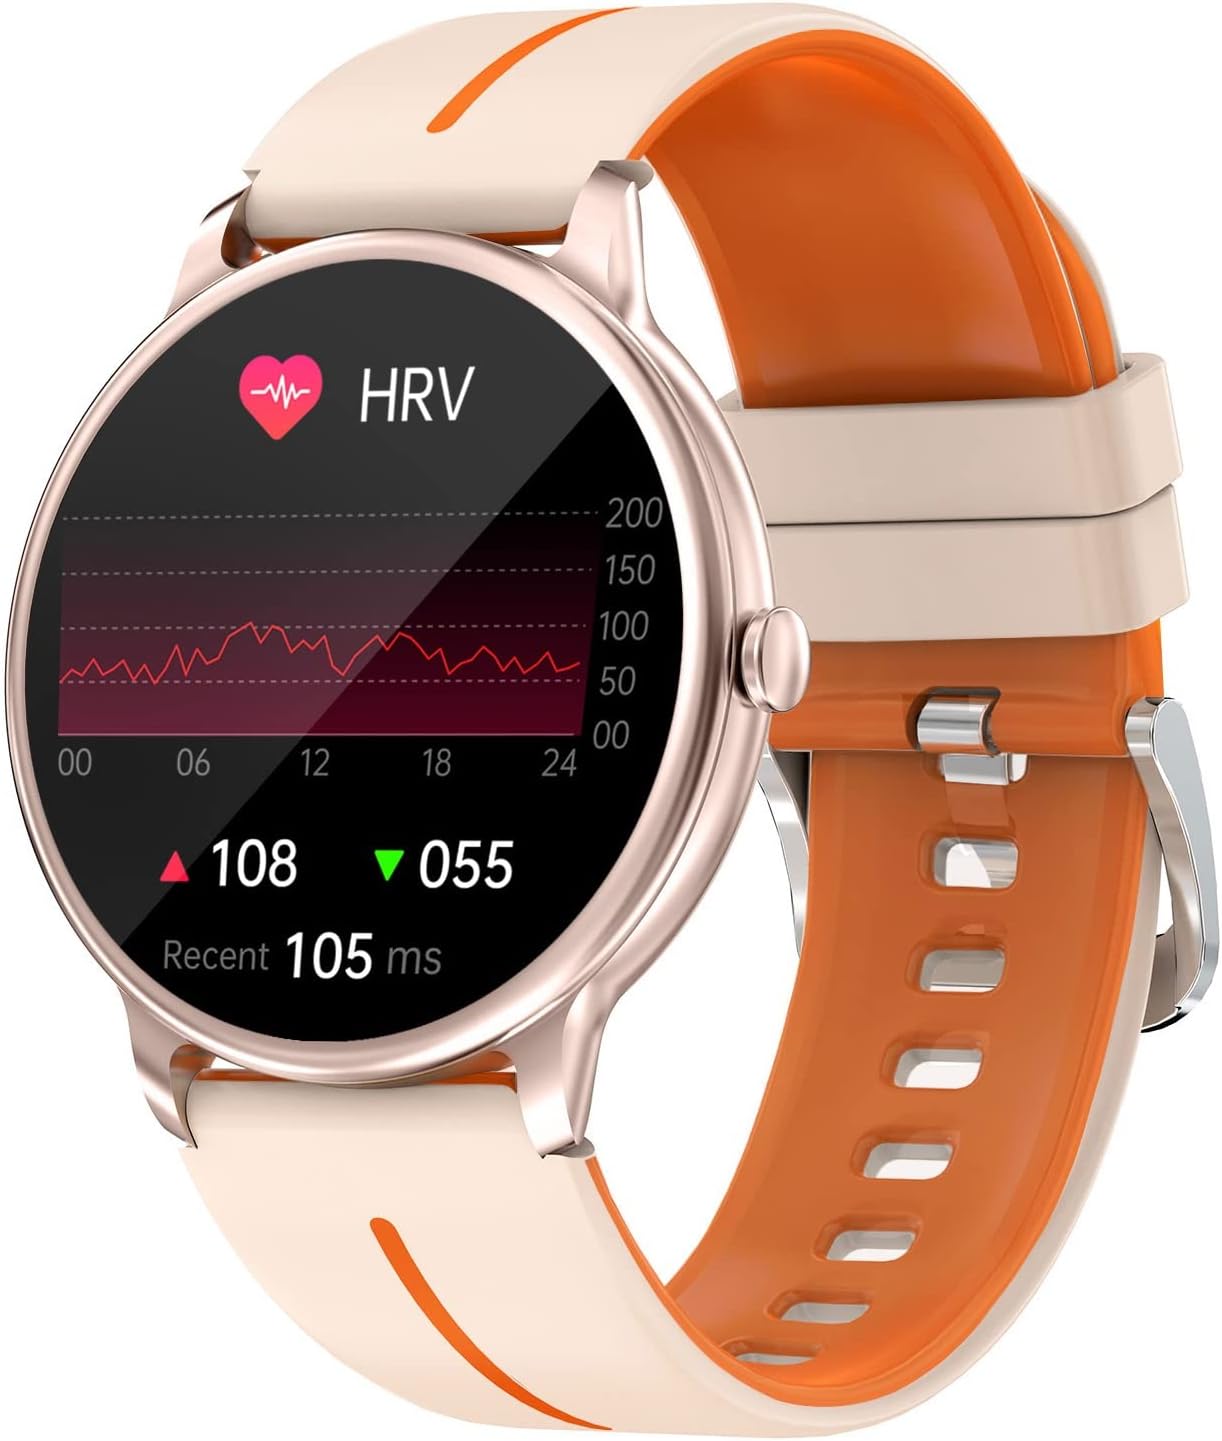 HYSTORM Health Smart Watch (HRV,BG) 1.43″ AMOLED Always-on Display Fitness Tracker Watch with Bluetooth Call, 8 Health Apps Blood Glucose Heart Monitor Android iOS Waterproof Smartwatch for Men Women